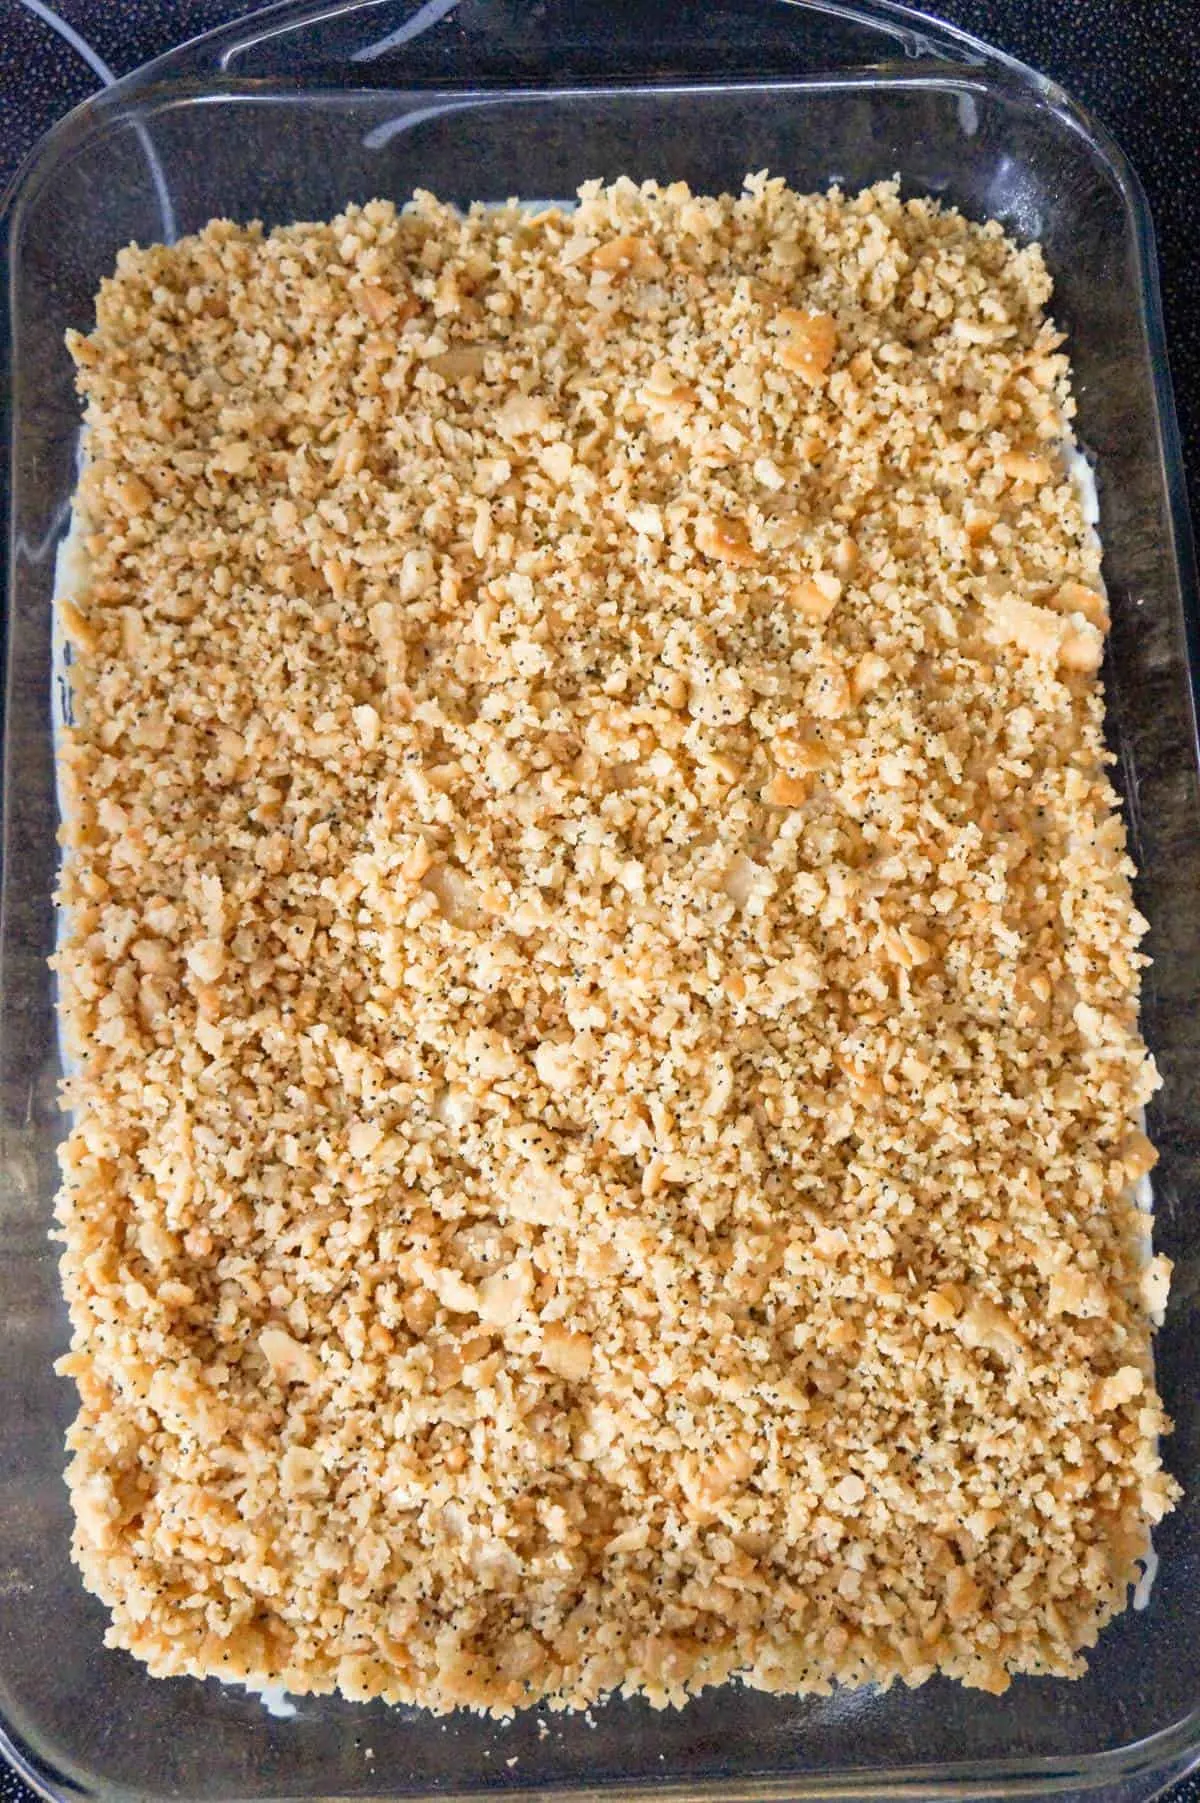 crumbled Ritz crackers on top of casserole in a baking dish